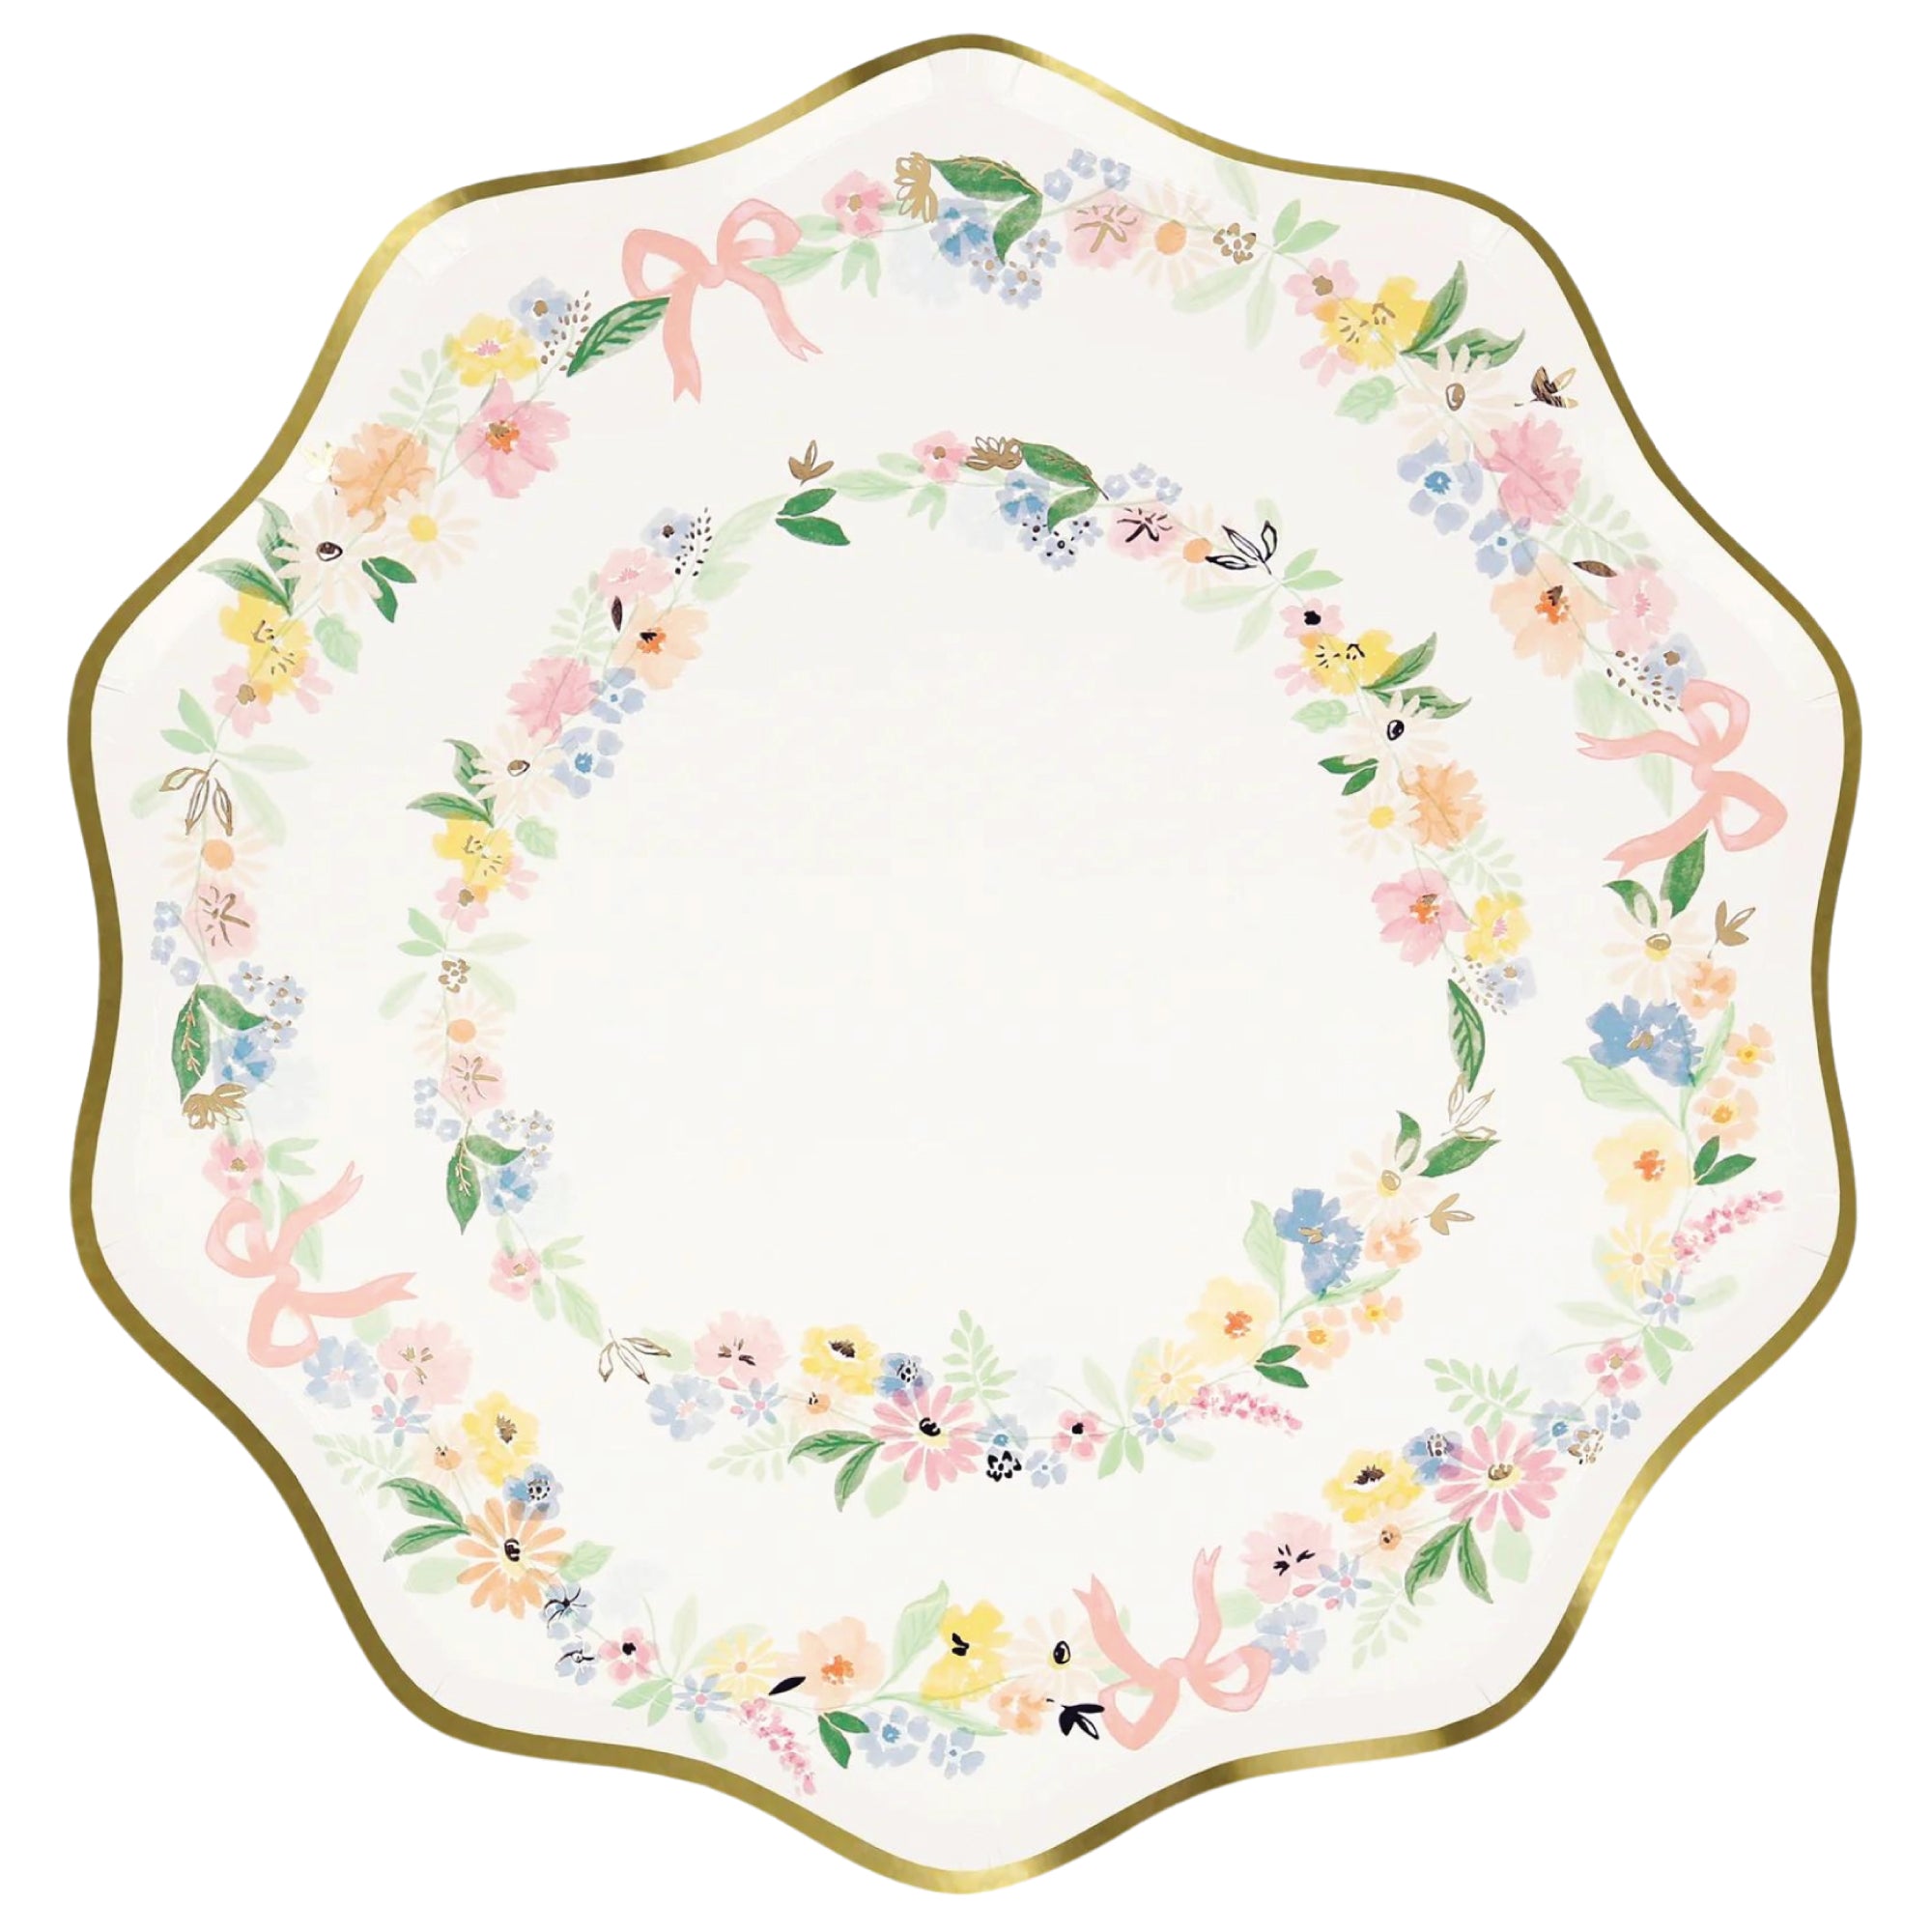 Elegant Floral Scalloped Dinner Plates 8ct | The Party Darling